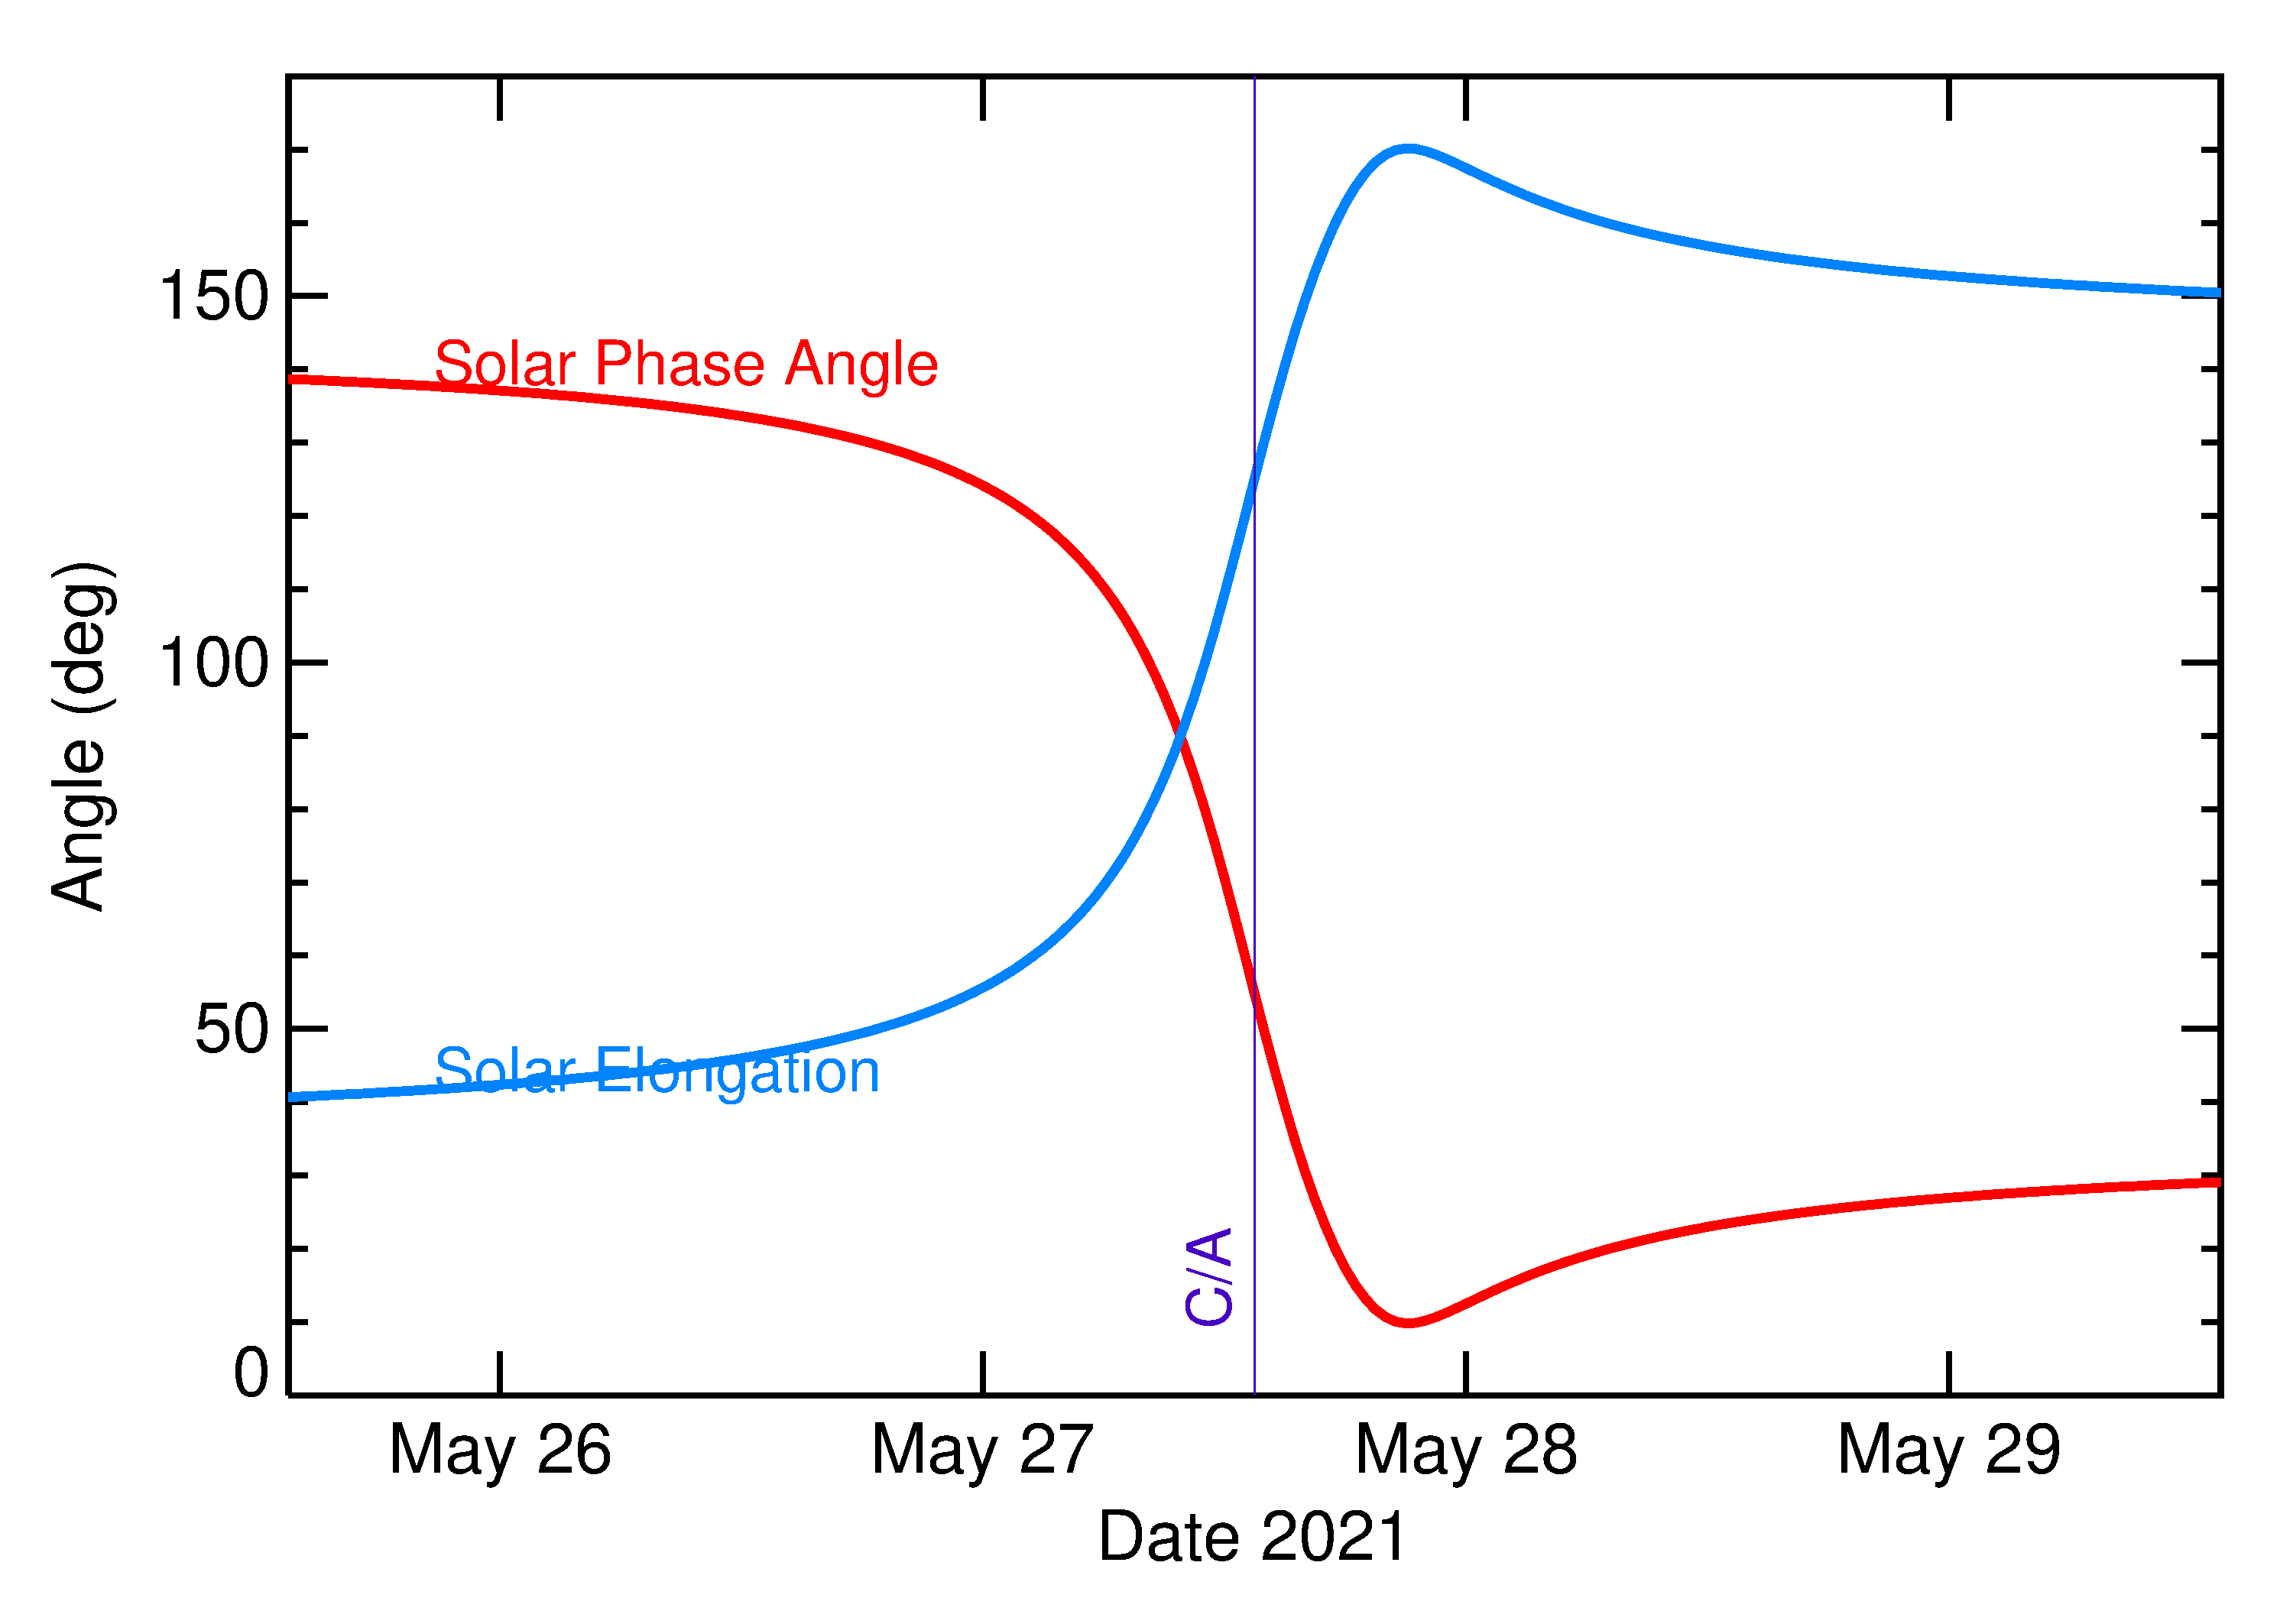 Solar Elongation and Solar Phase Angle of 2021 LV in the days around closest approach